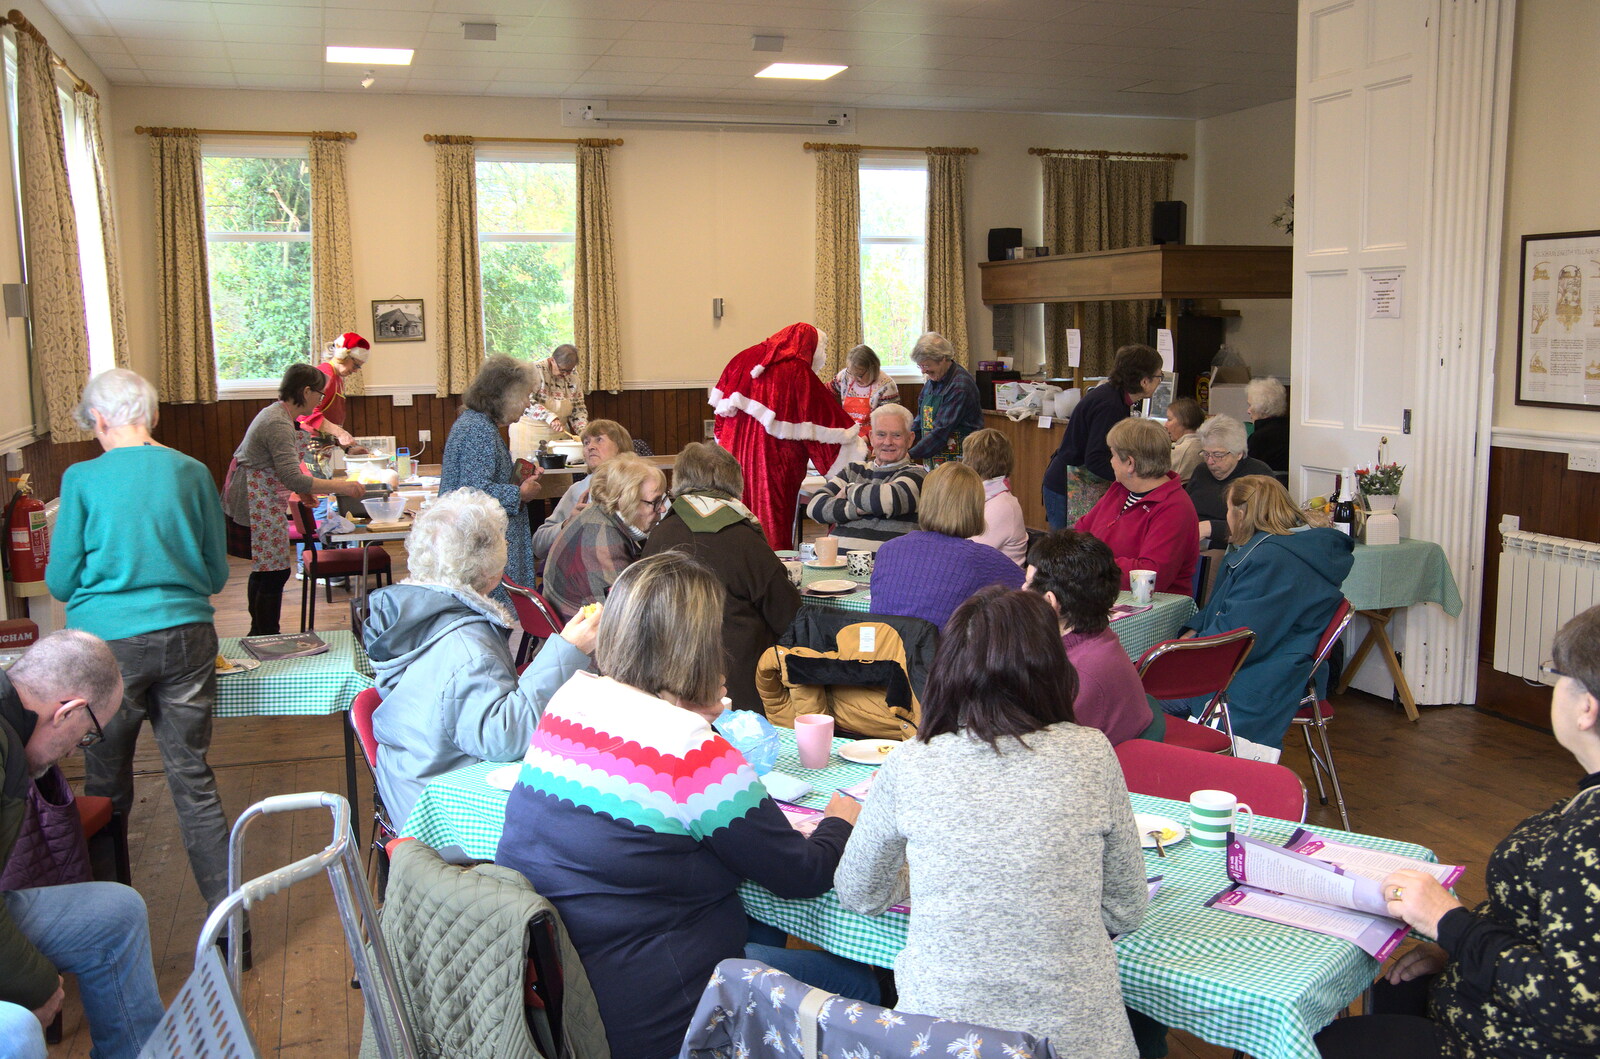 It's busy in the village hall from The GSB at Wickham Skeith, Suffolk - 19th November 2022